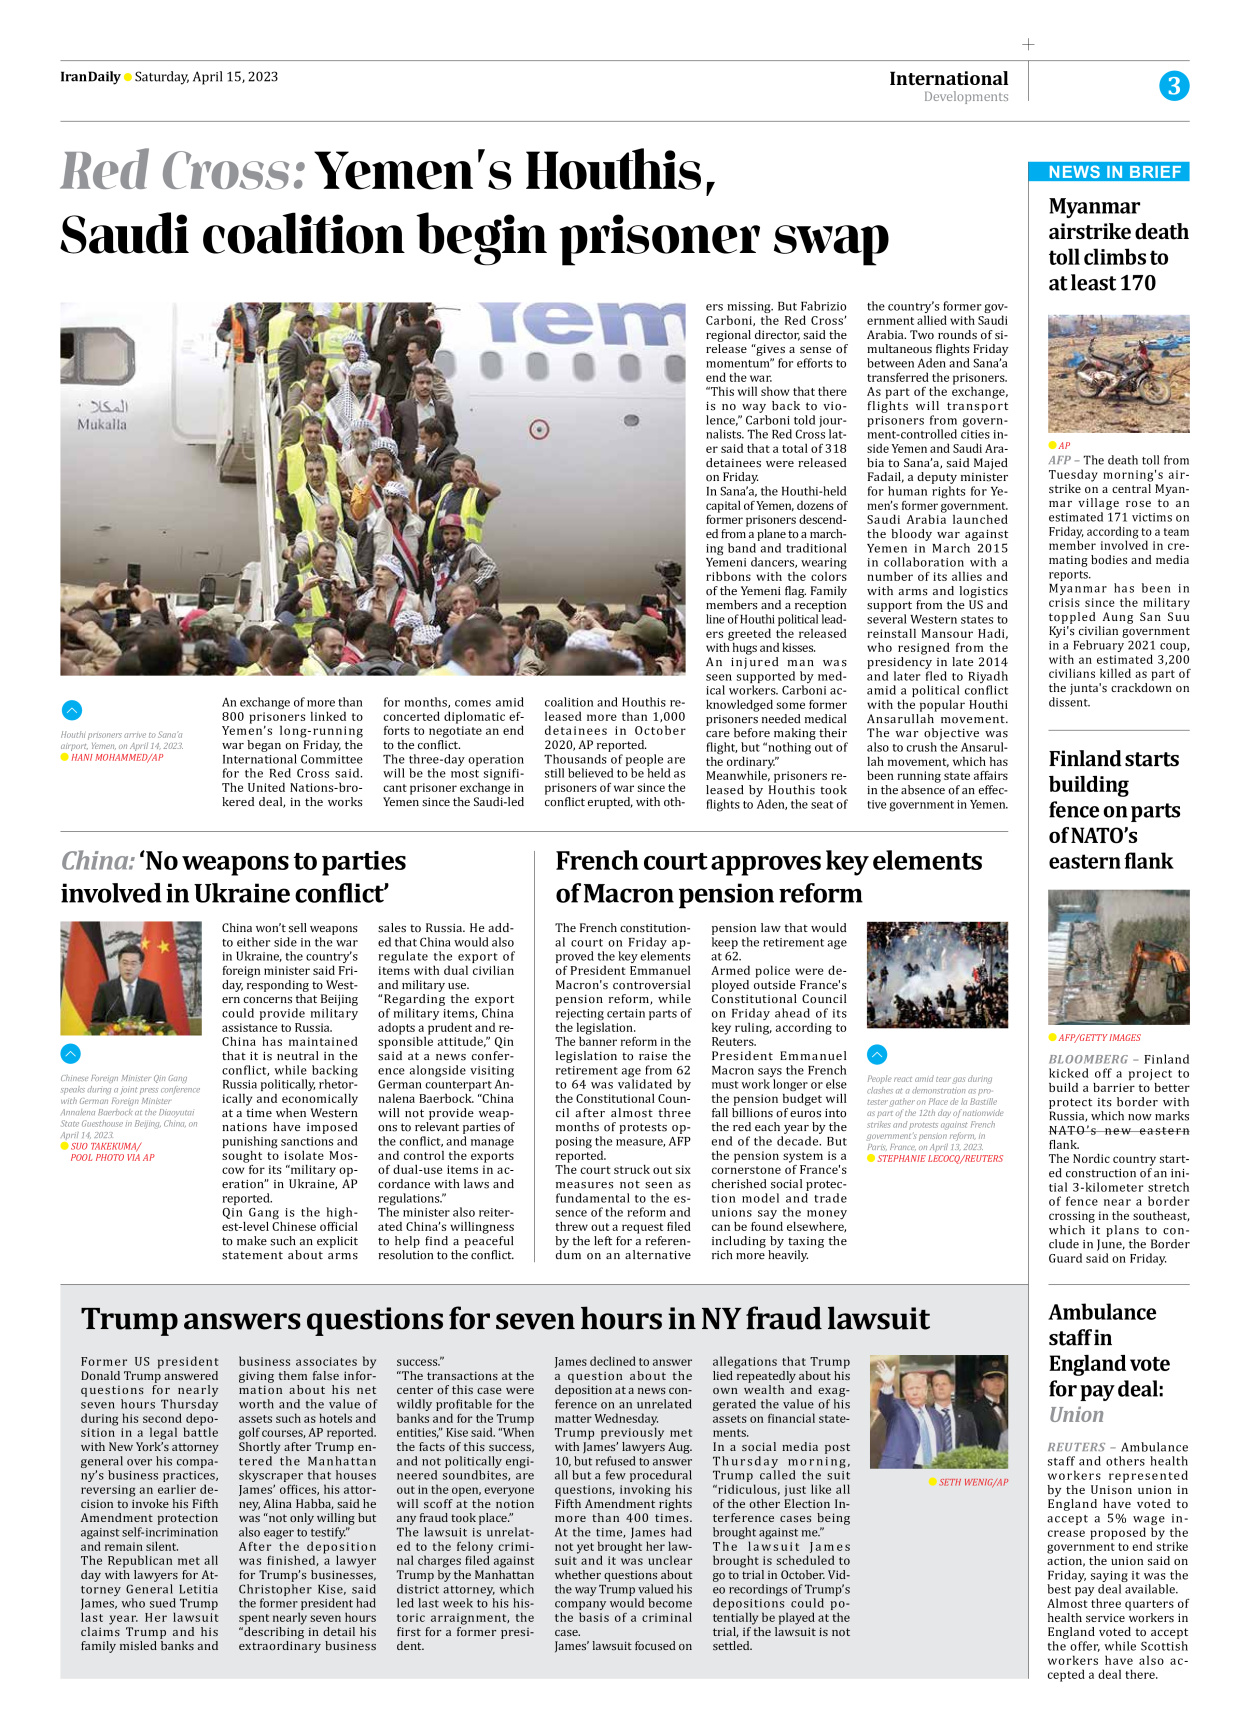 Iran Daily - Number Seven Thousand Two Hundred and Sixty Eight - 15 April 2023 - Page 3